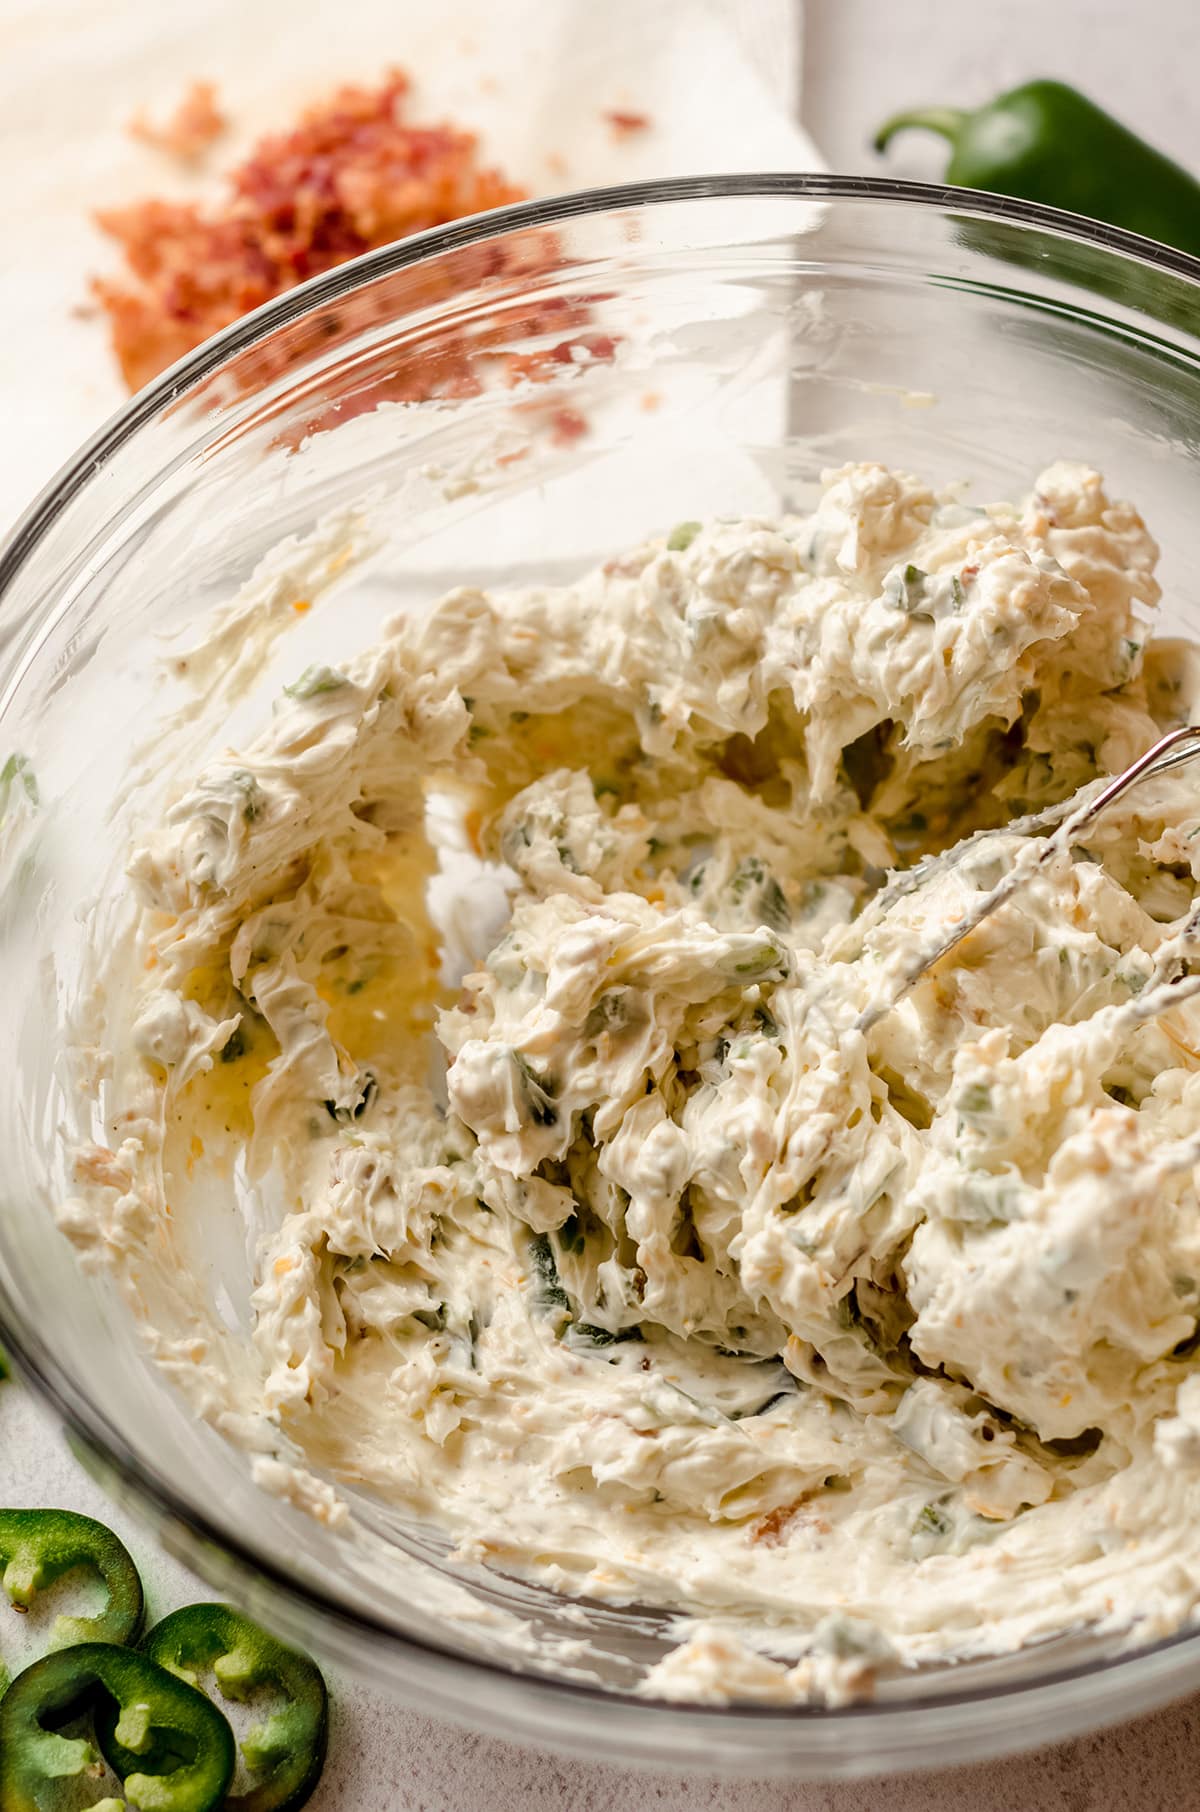 jalapeno cream cheese dip in a glass bowl with beaters